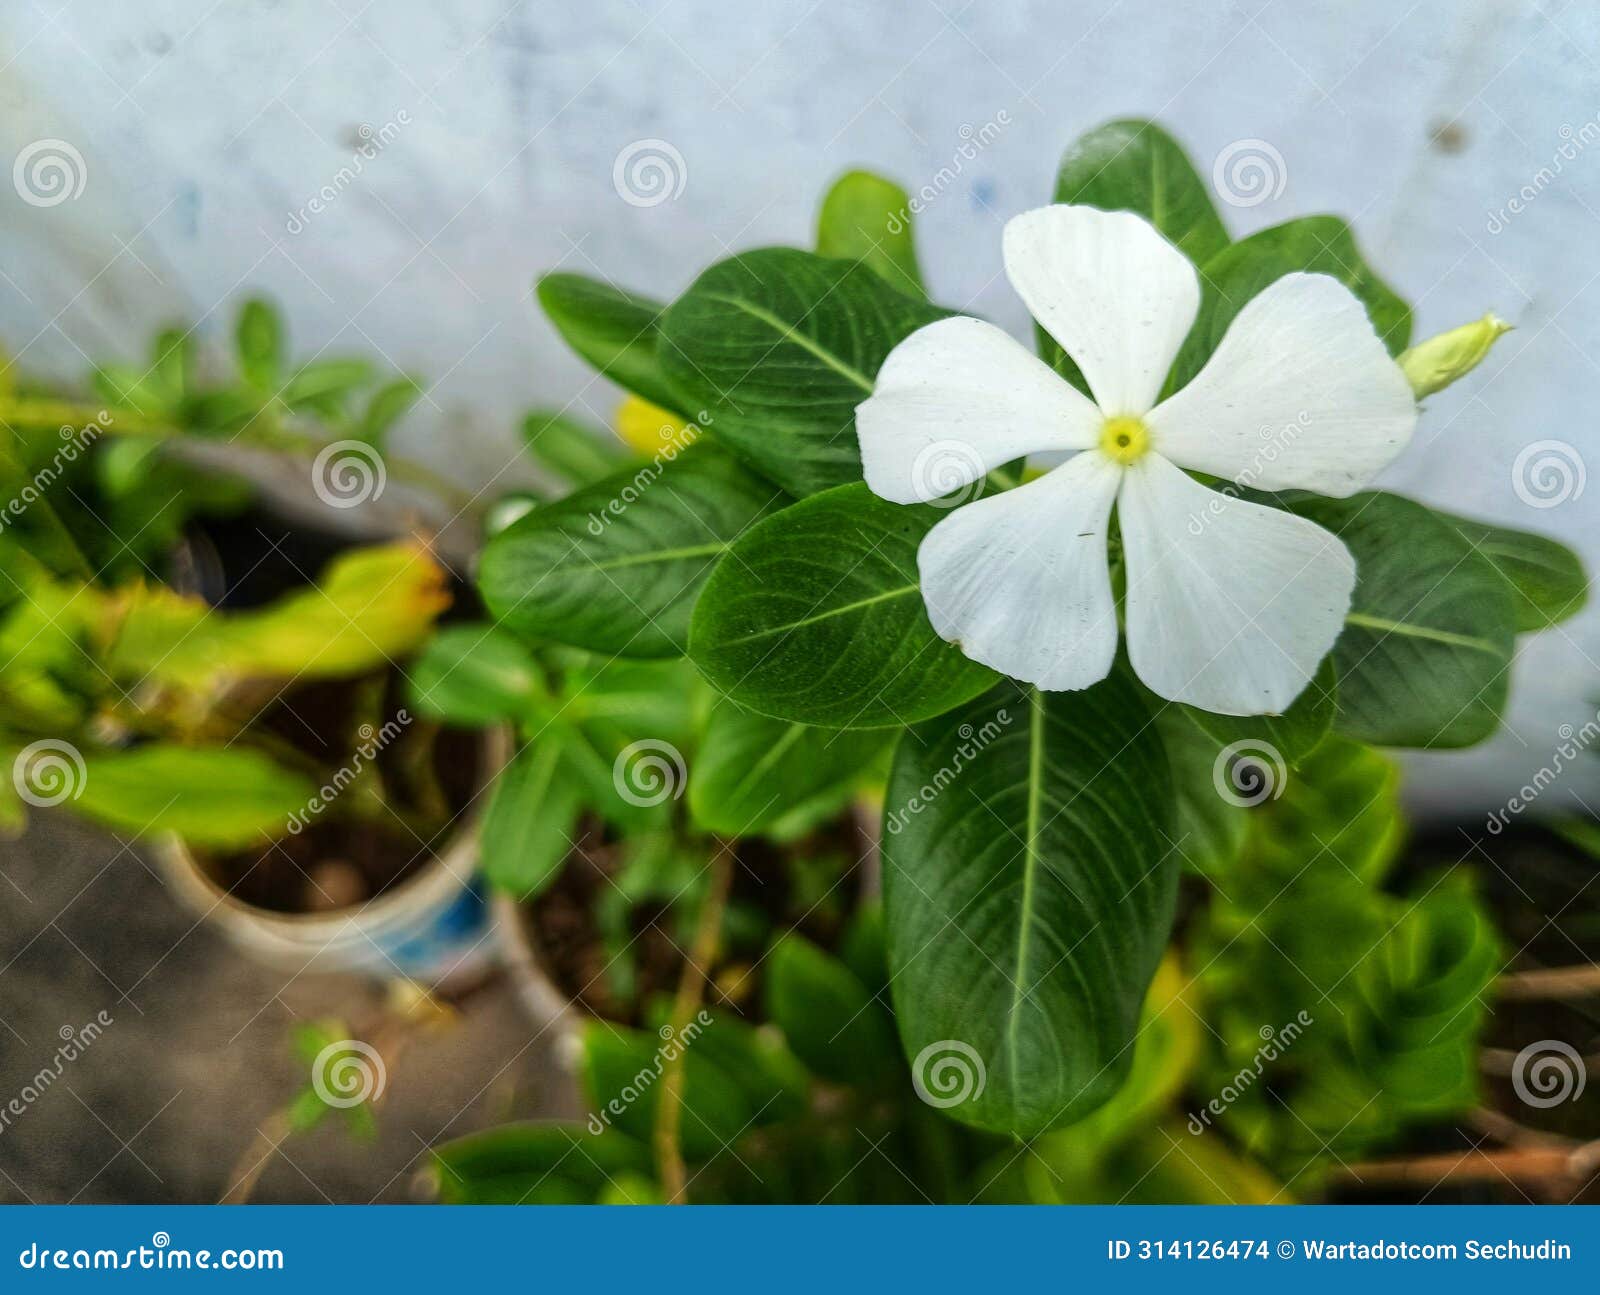 beautiful white flower and the green leaves natur